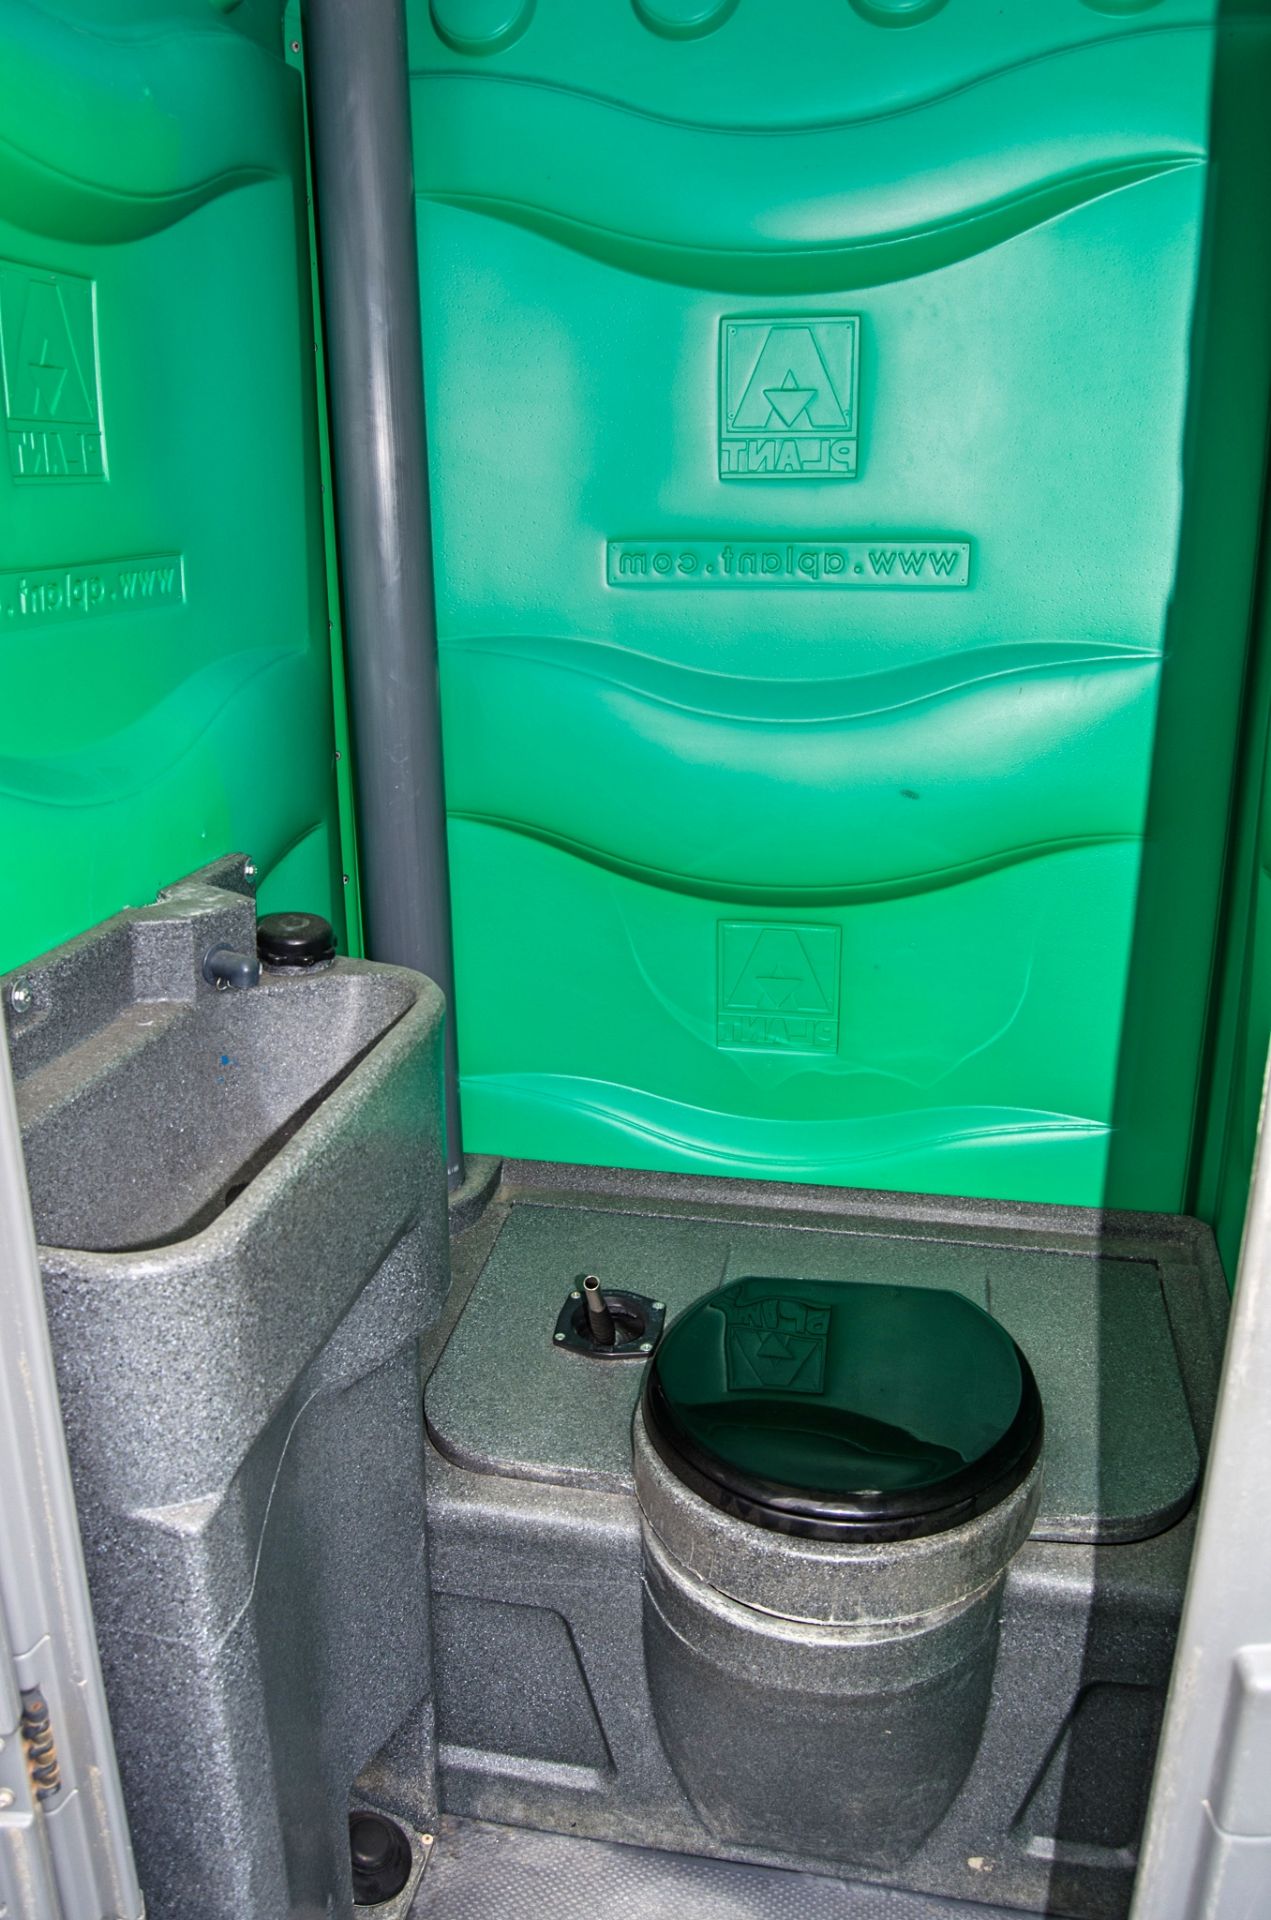 Plastic portable toilet A415514 - Image 3 of 3